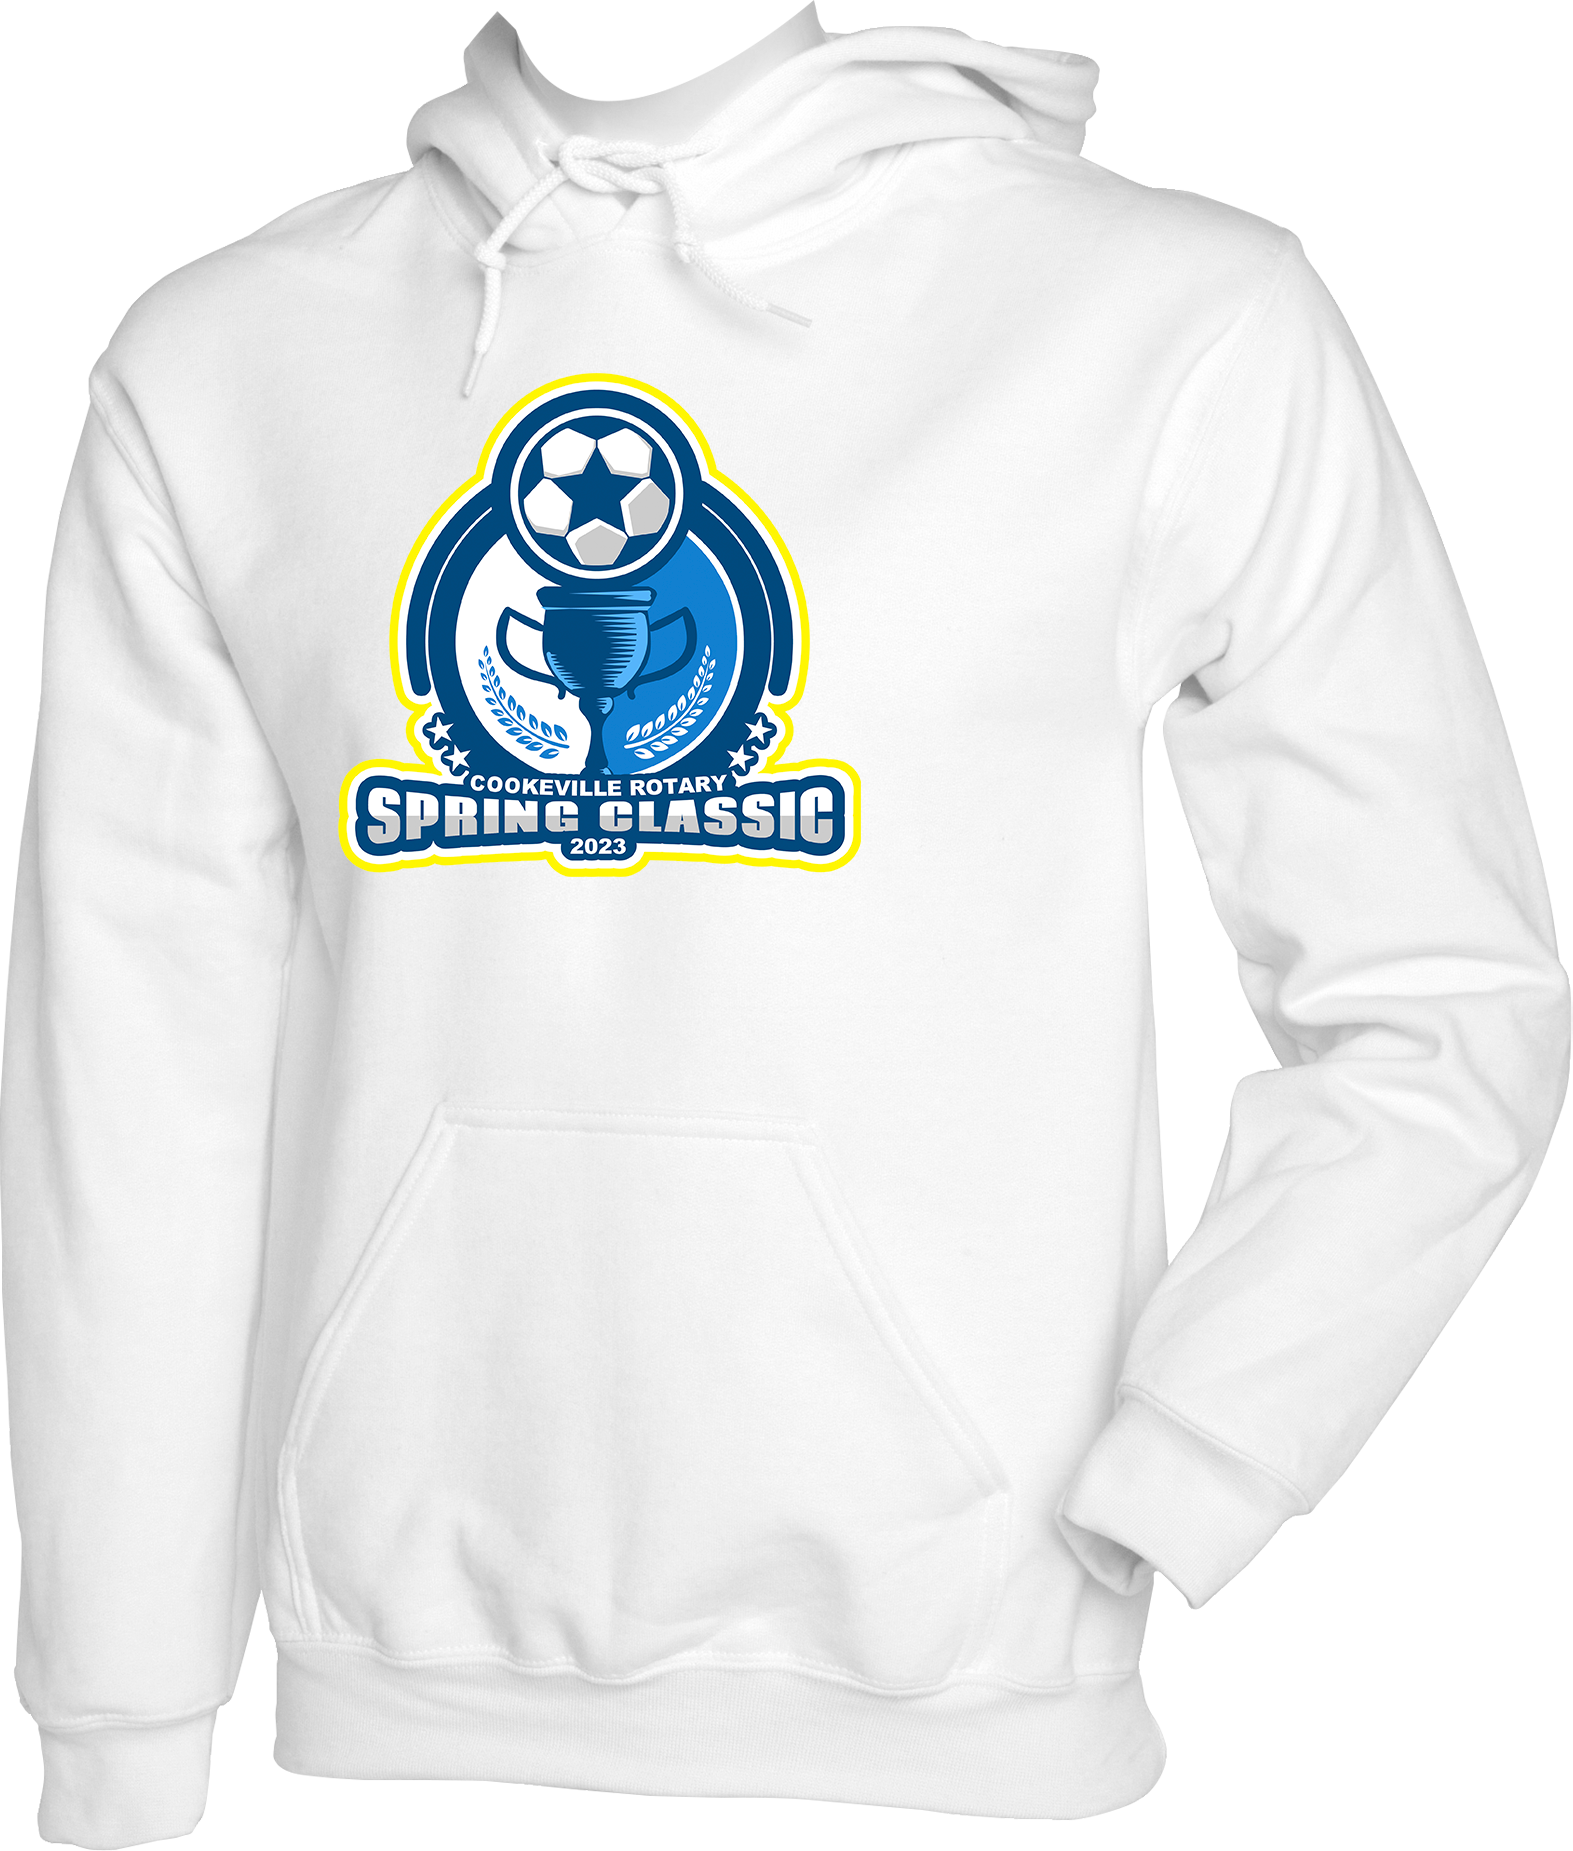 HOODIES - 2023 Cookesville Rotary Soccer Classic